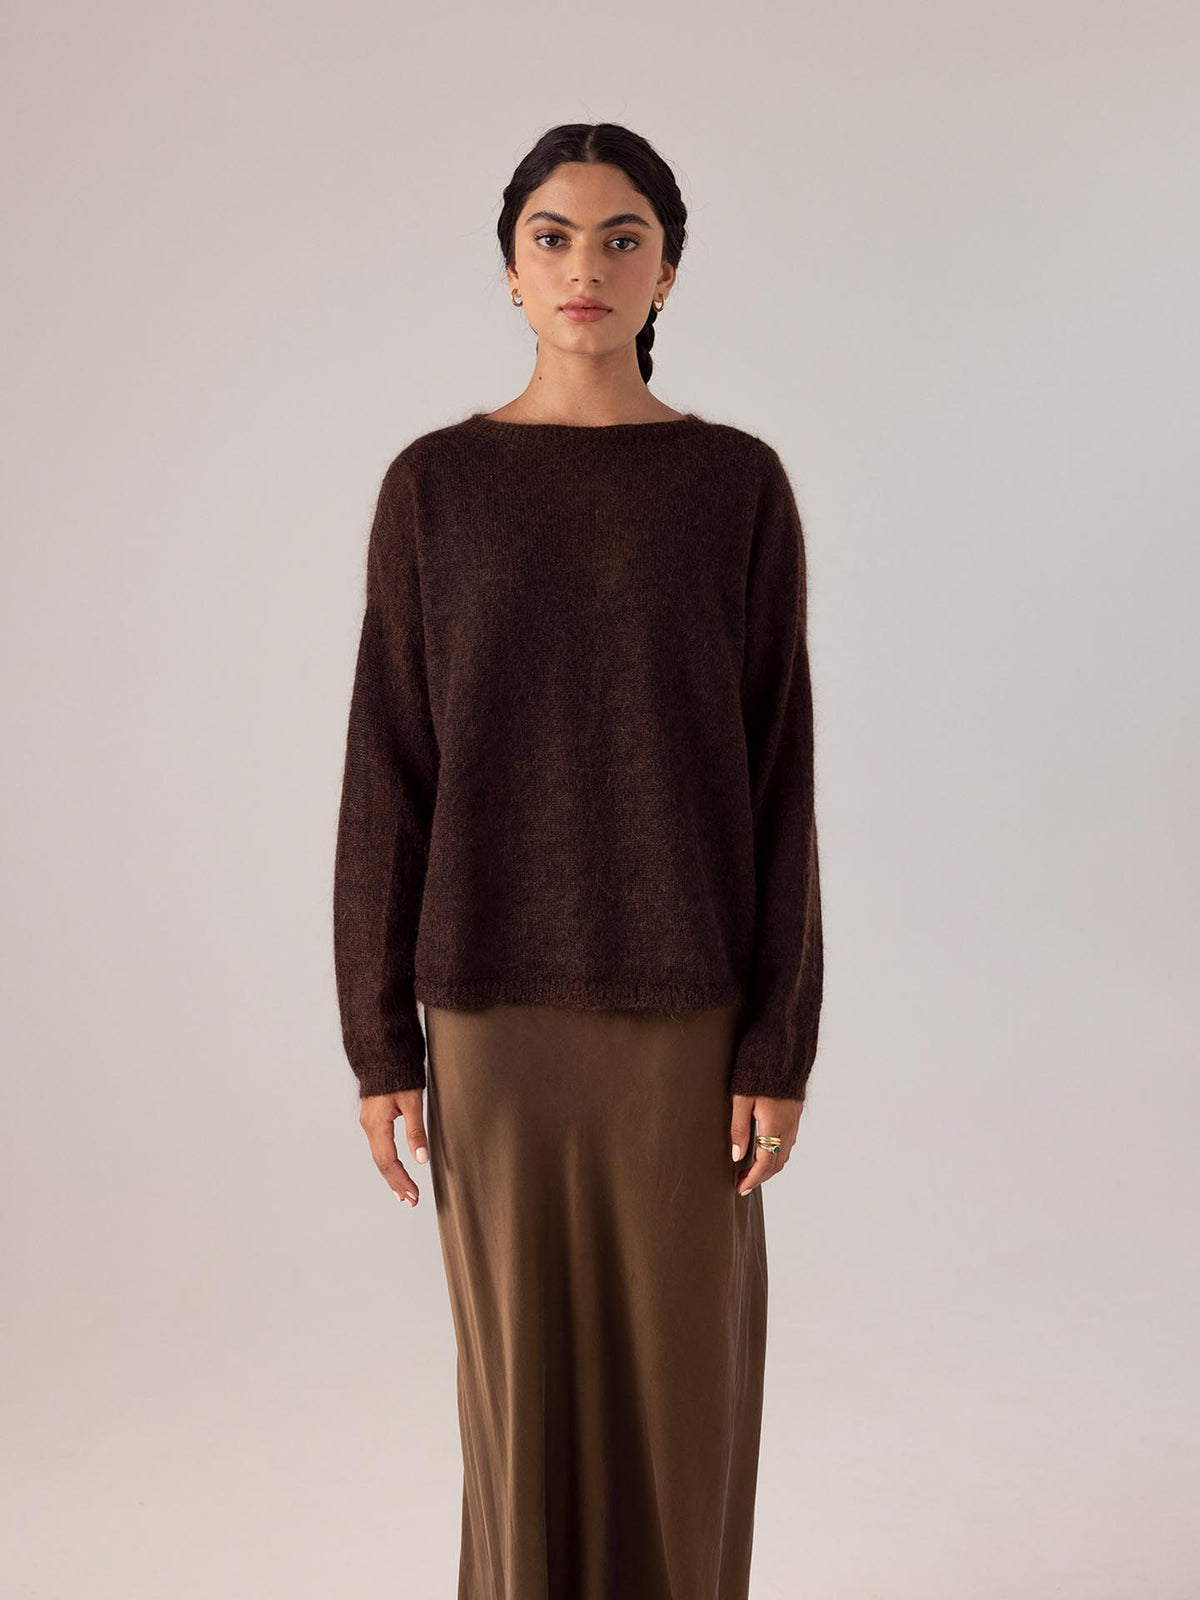 The model is wearing a Francie Cocoa feather knit sweater and tan skirt.